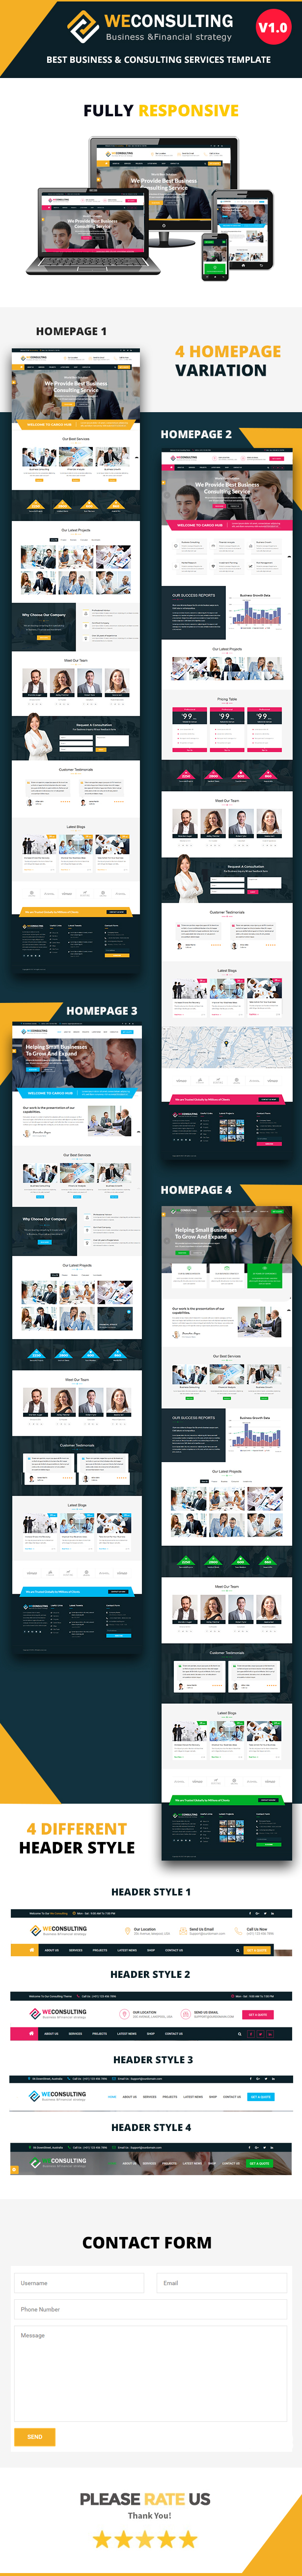 WECONSULTING - Responsive BootStrap Drupal 8.7 Theme - 1